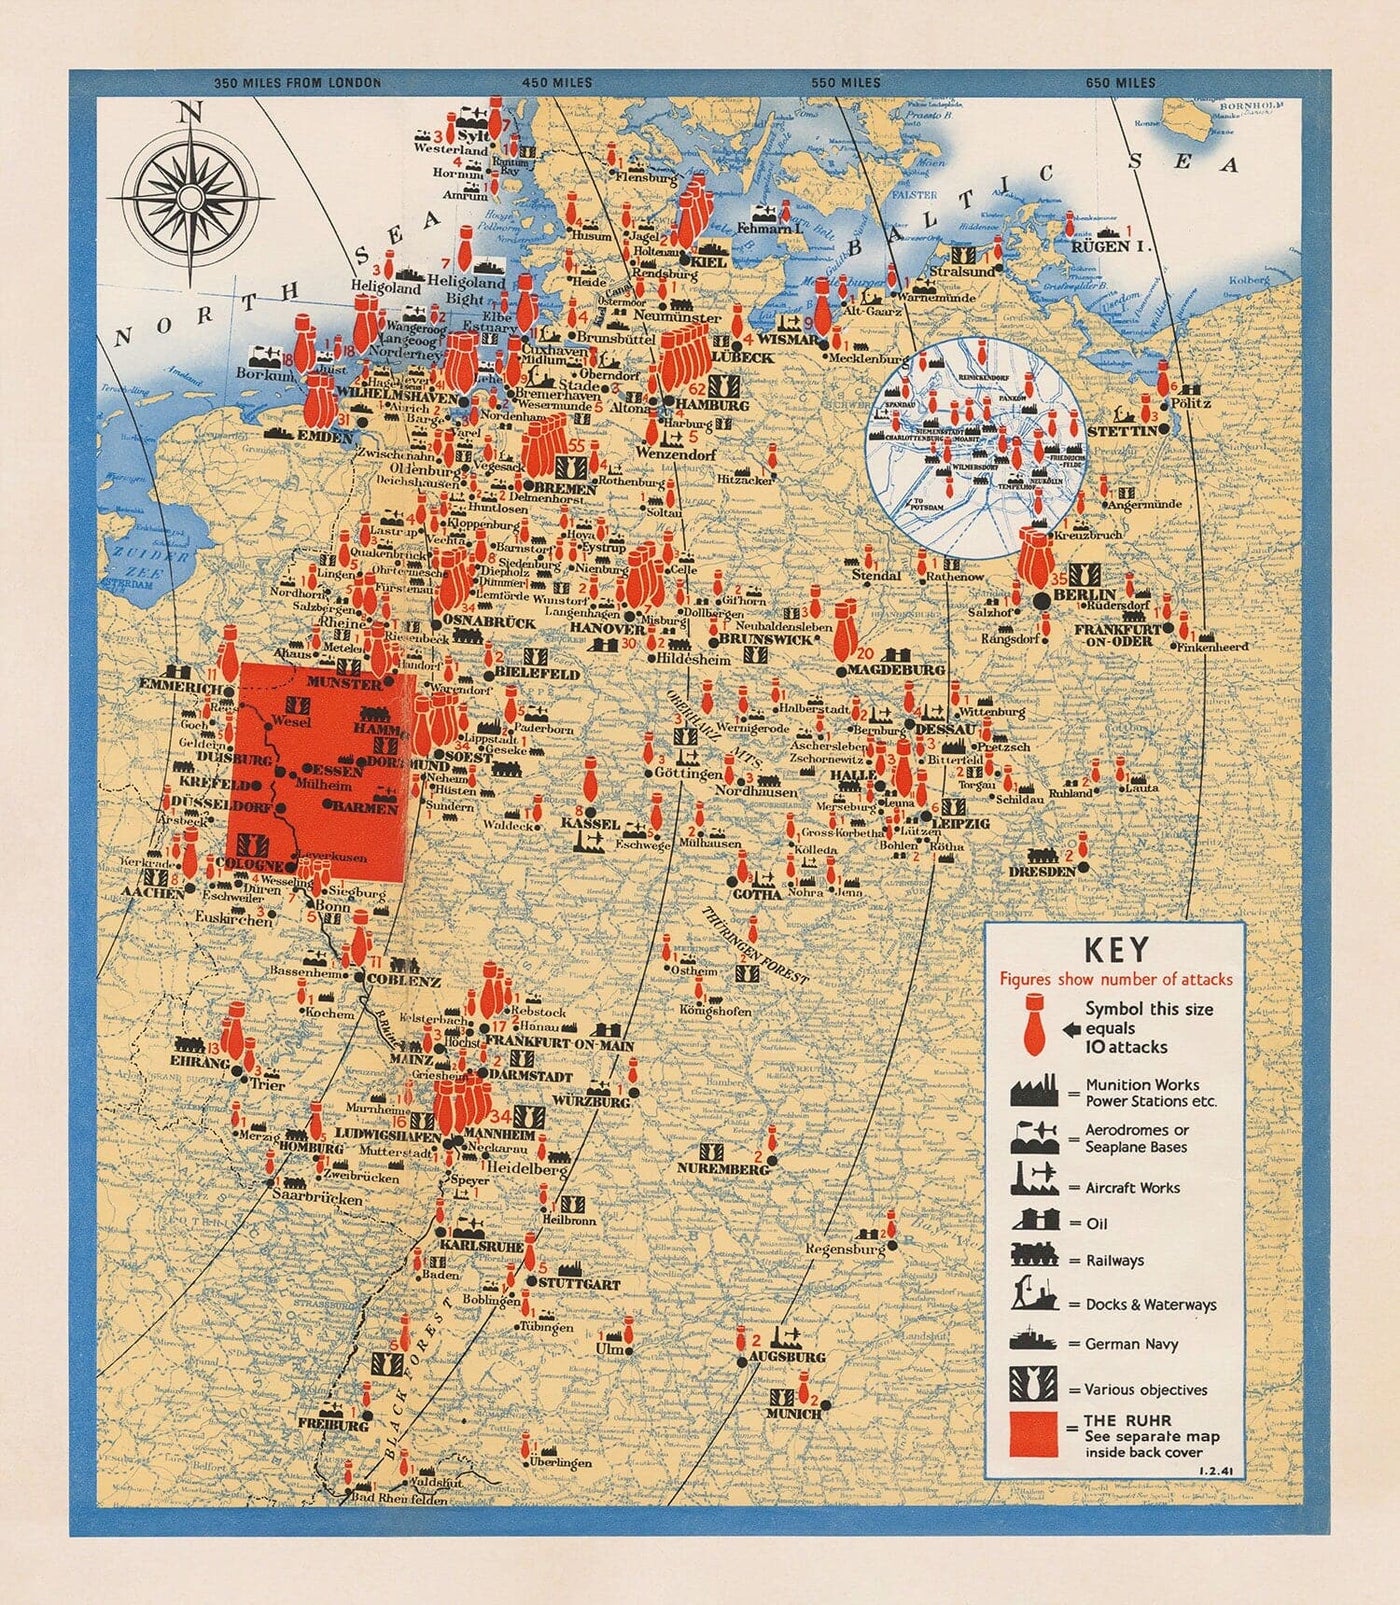 The Air Offensive Against Germany, 1941 - Old WW2 Bombing Map - British RAF & Air Ministry Propaganda